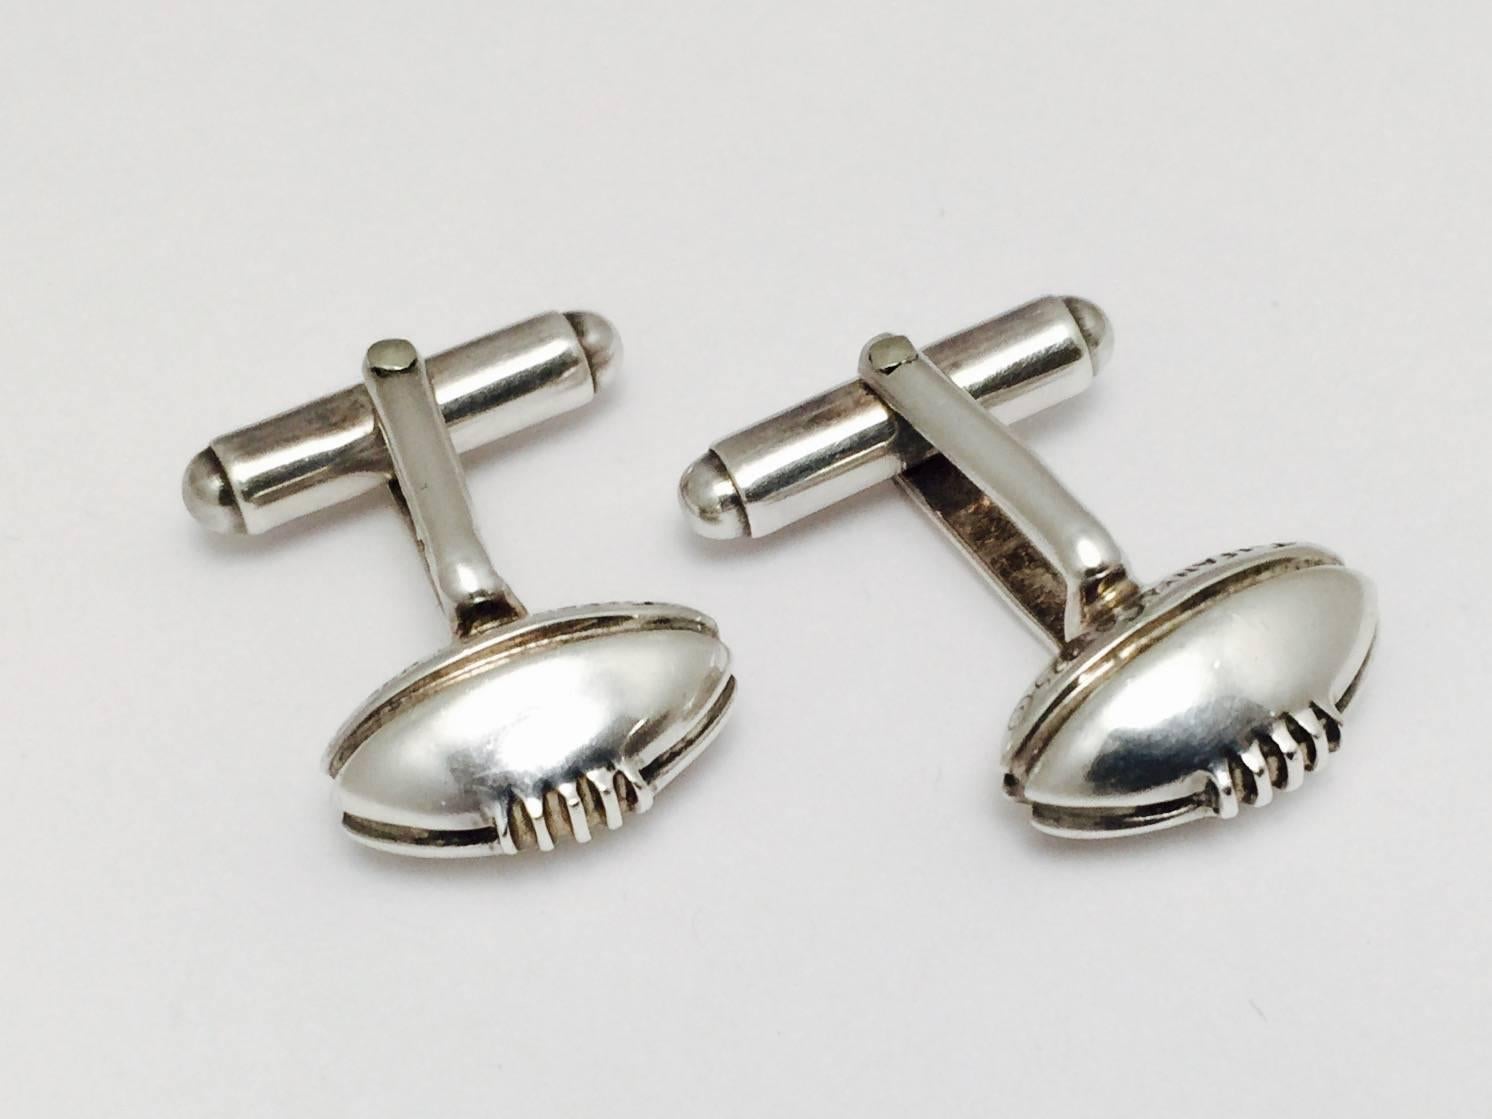 Be touchdown ready with these Tiffany sterling silver cufflinks.  Rare vintage, very good condition, a little wear on the stamp of silver grade mark 925 under magnification consistent with wear. Go team!